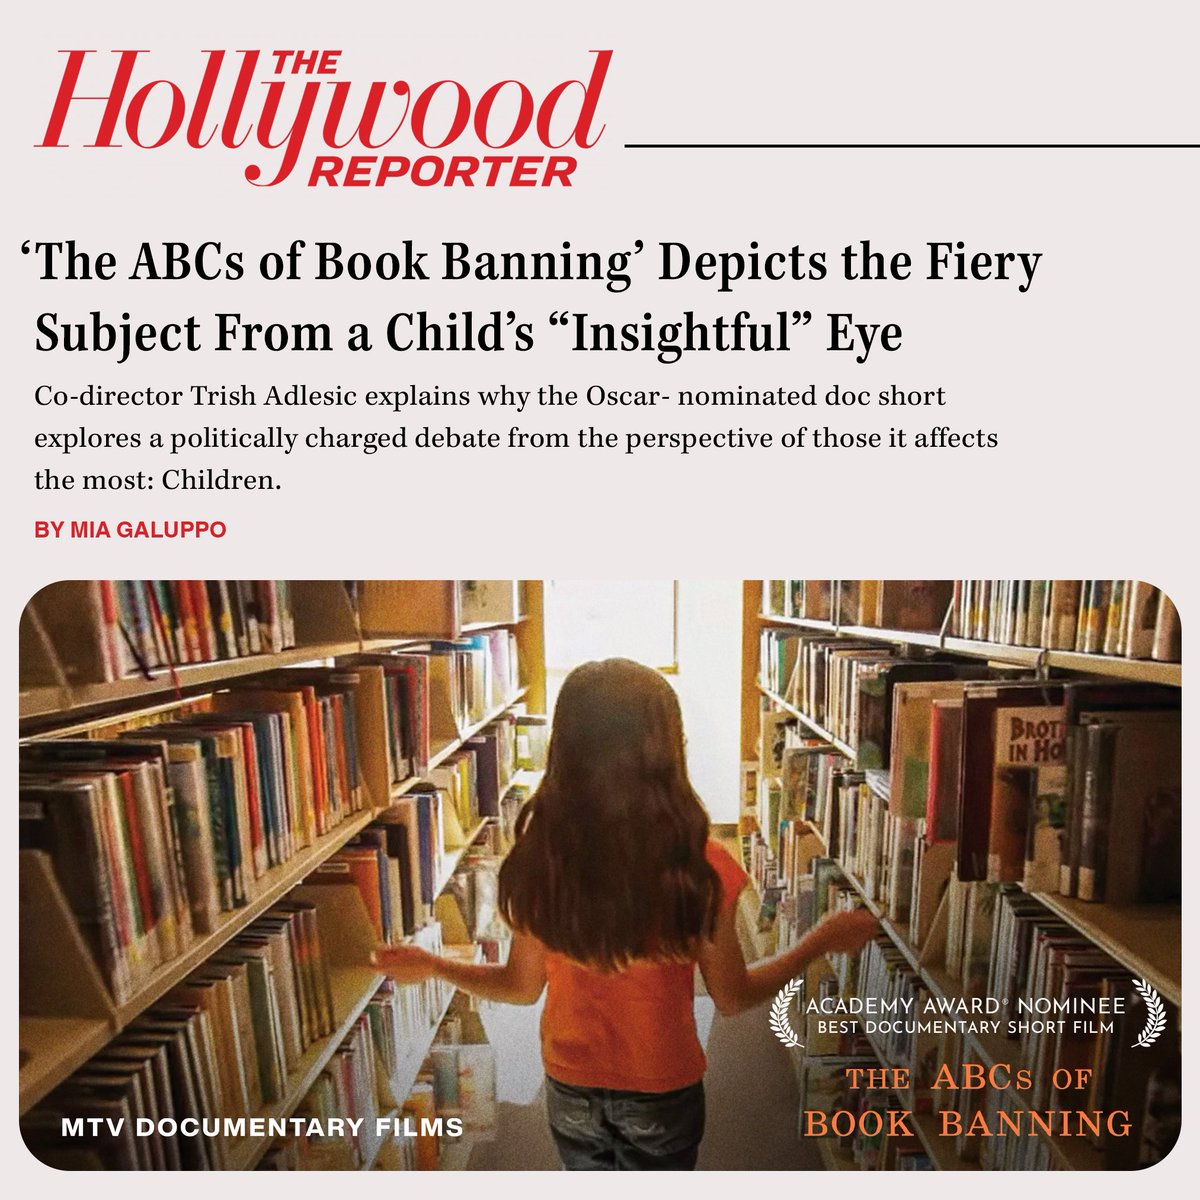 'We should tell it from the perspective of the kids because they’re the ones most impacted.' @trishadlesic, Co-Director of THE ABCs OF BOOK BANNING, spoke with @hollywoodreporter about the #Oscar-nominated short film, now streaming on @paramountplus